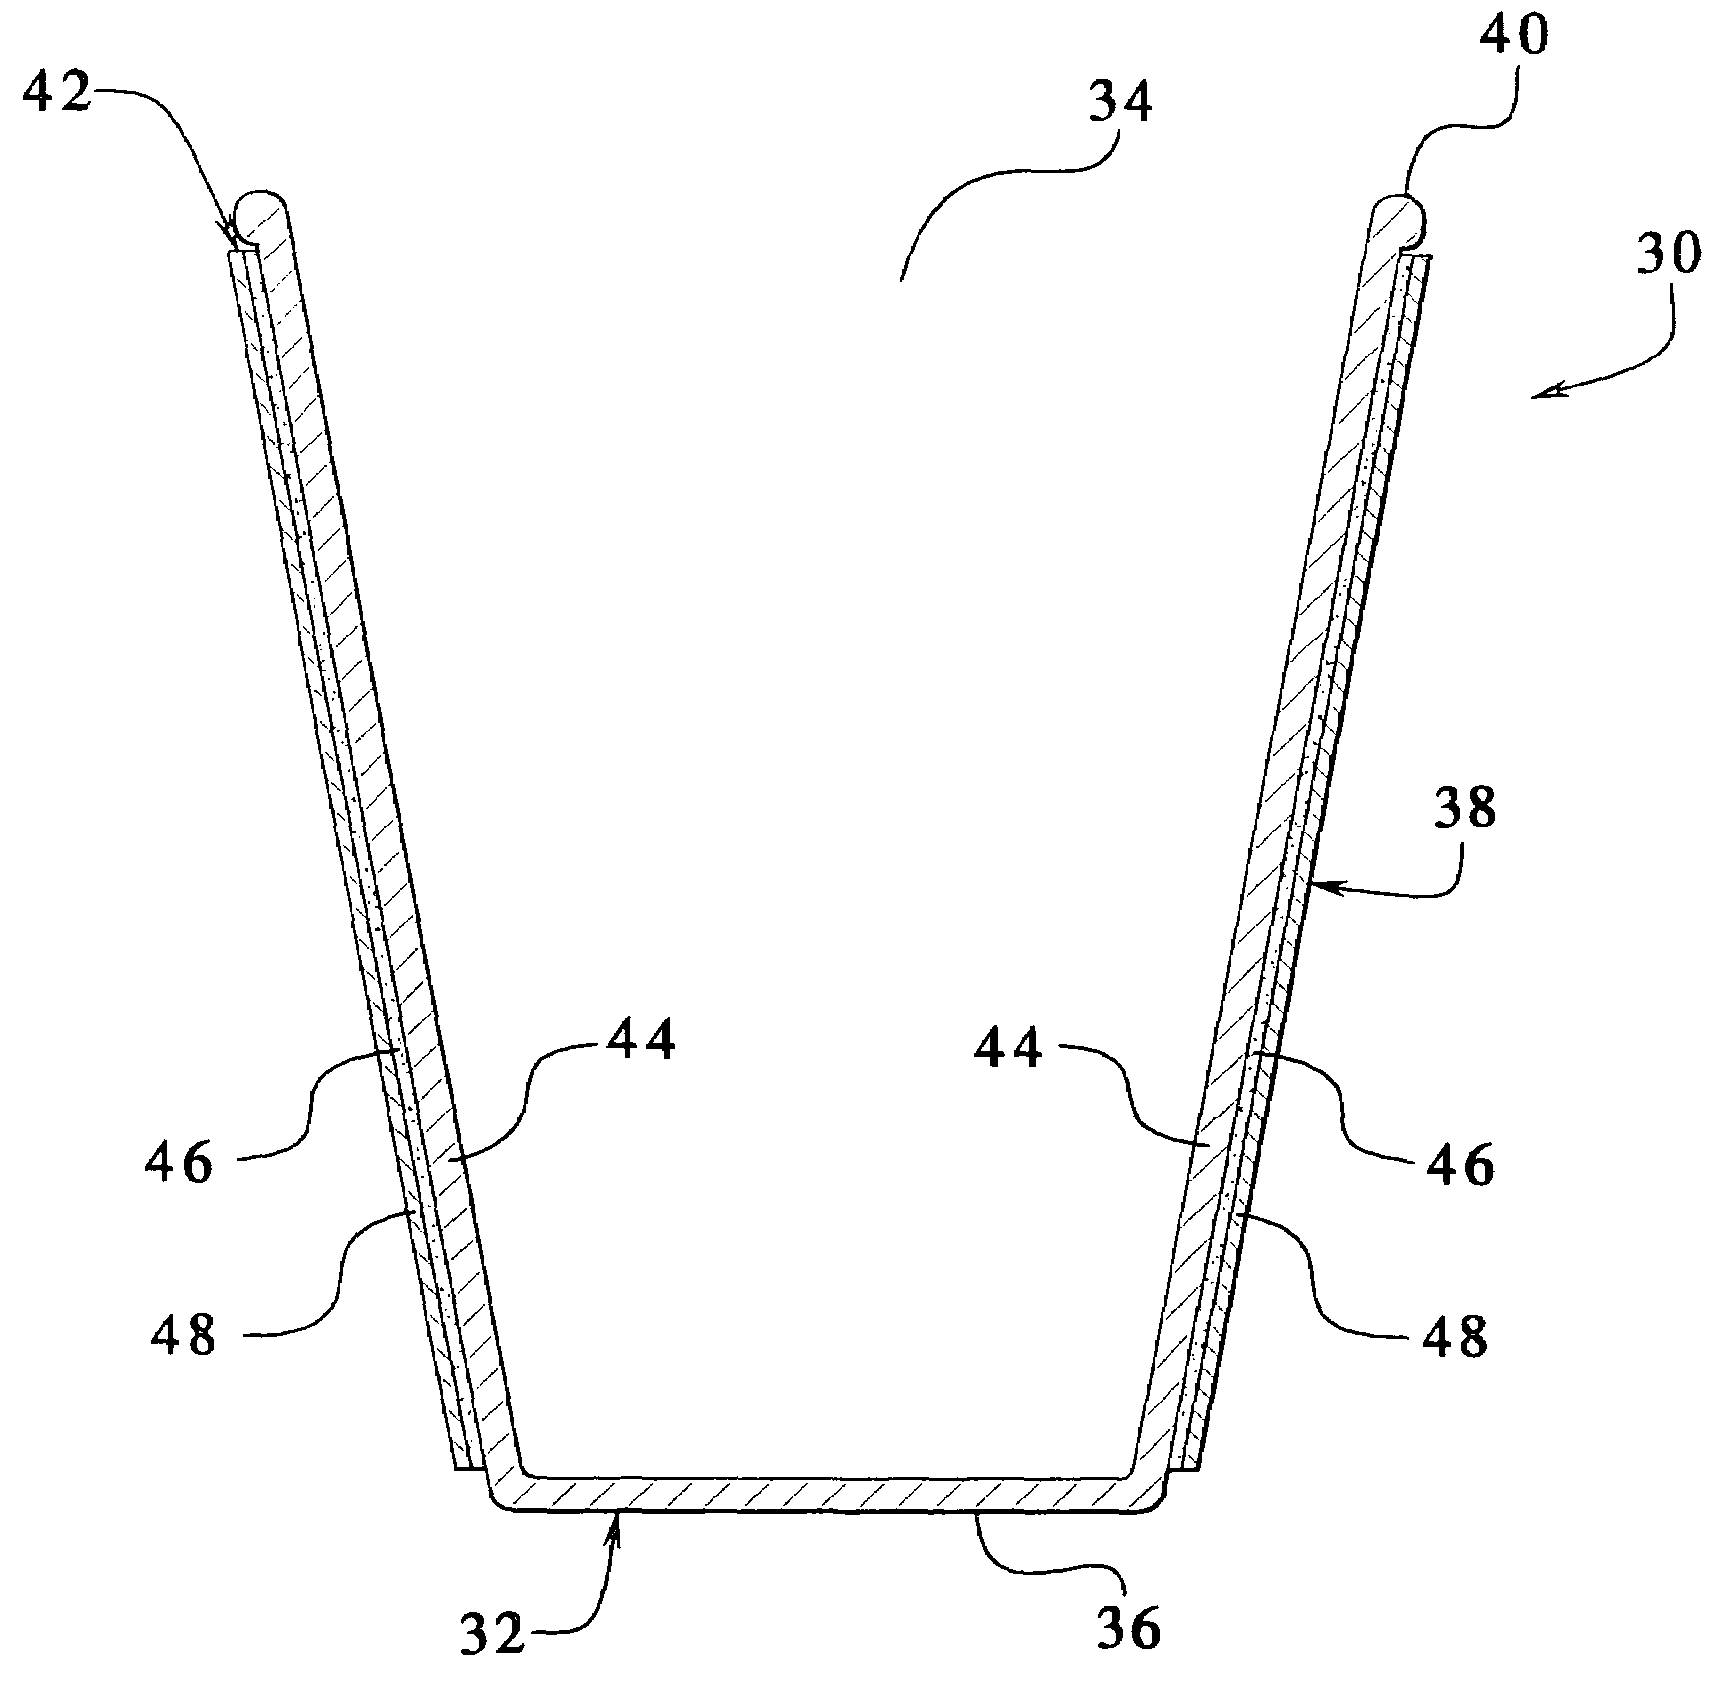 Method of manufacturing a reinforced plastic foam cup